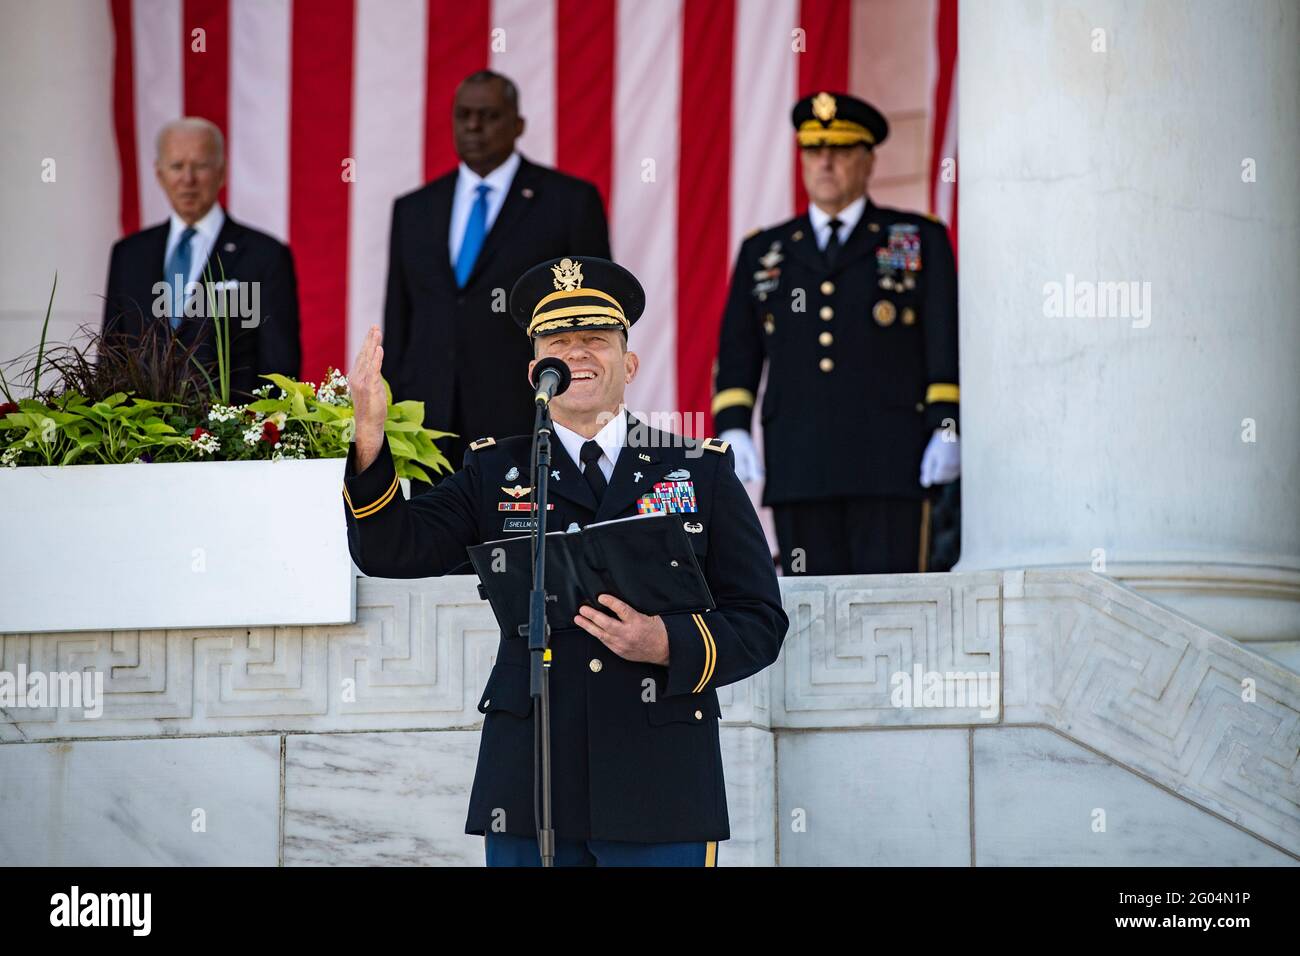 Arlington, United States Of America. 31st May, 2021. U.S. Army Chaplain Col. Michael Shellman provides remarks during during the annual Memorial Day commemoration in the Memorial Amphitheater at Arlington National Cemetery May 31, 2021 Arlington, Virginia. Standing behind Shellman are U.S President Joe Biden, left, Secretary of Defense Lloyd Austin and Joint Chiefs Chairman Mark Milley, right. Credit: Planetpix/Alamy Live News Stock Photo